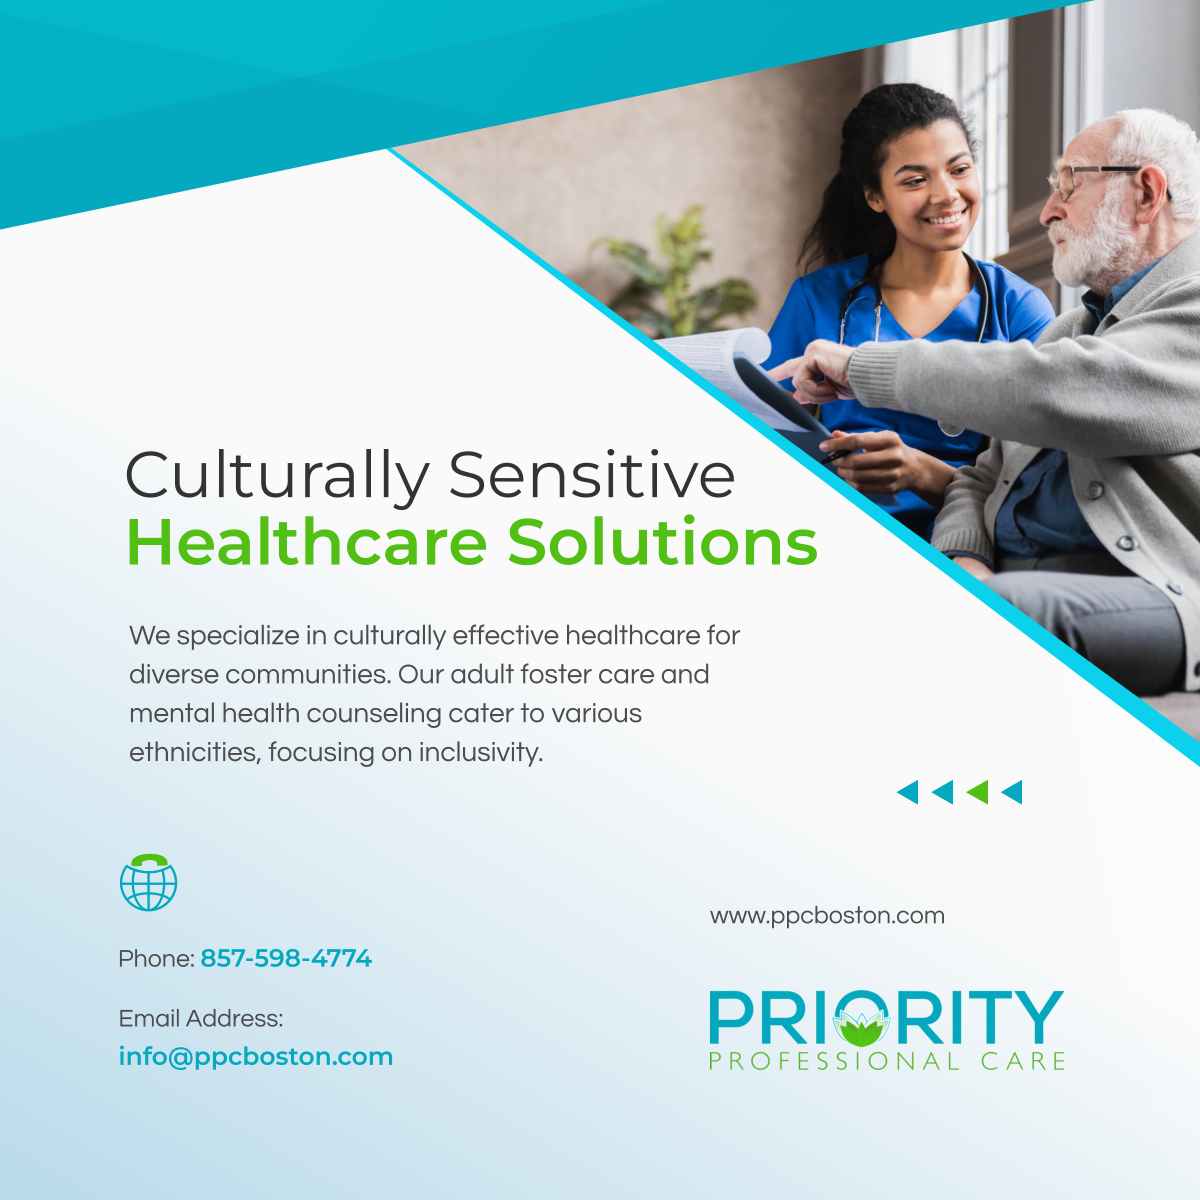 Embrace a healthcare service that values diversity. At Priority Professional Care, we offer culturally sensitive care in adult foster care and mental health counseling. Experience our inclusive approach. 

#TrainingTuesday #FosterCareSuccessStories #HealthcareService